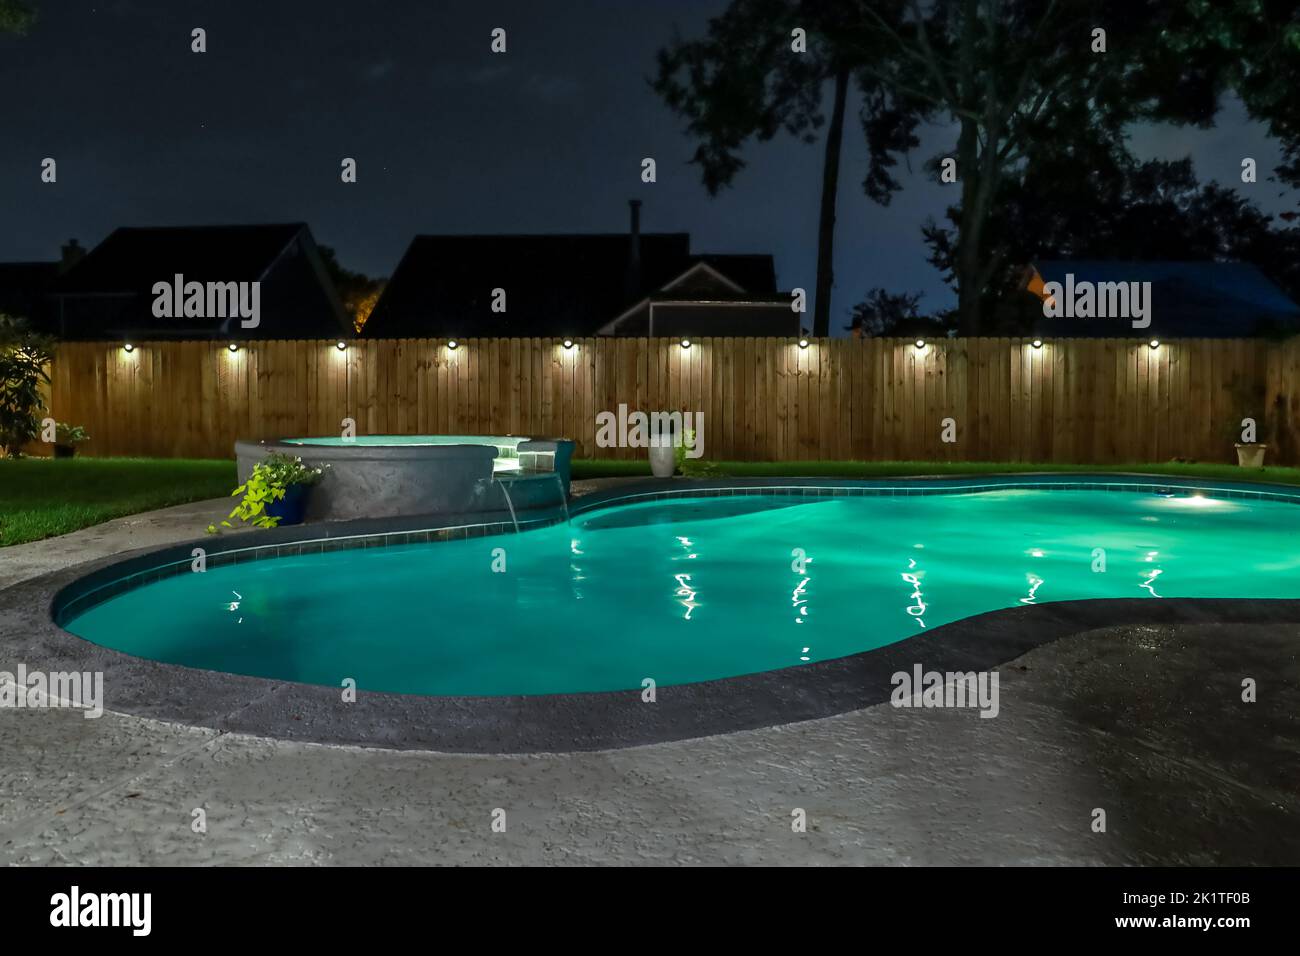 A backyard swimming pool and jacuzzi hot tob at night with solar lights around the fence for privacy and illumination. Stock Photo